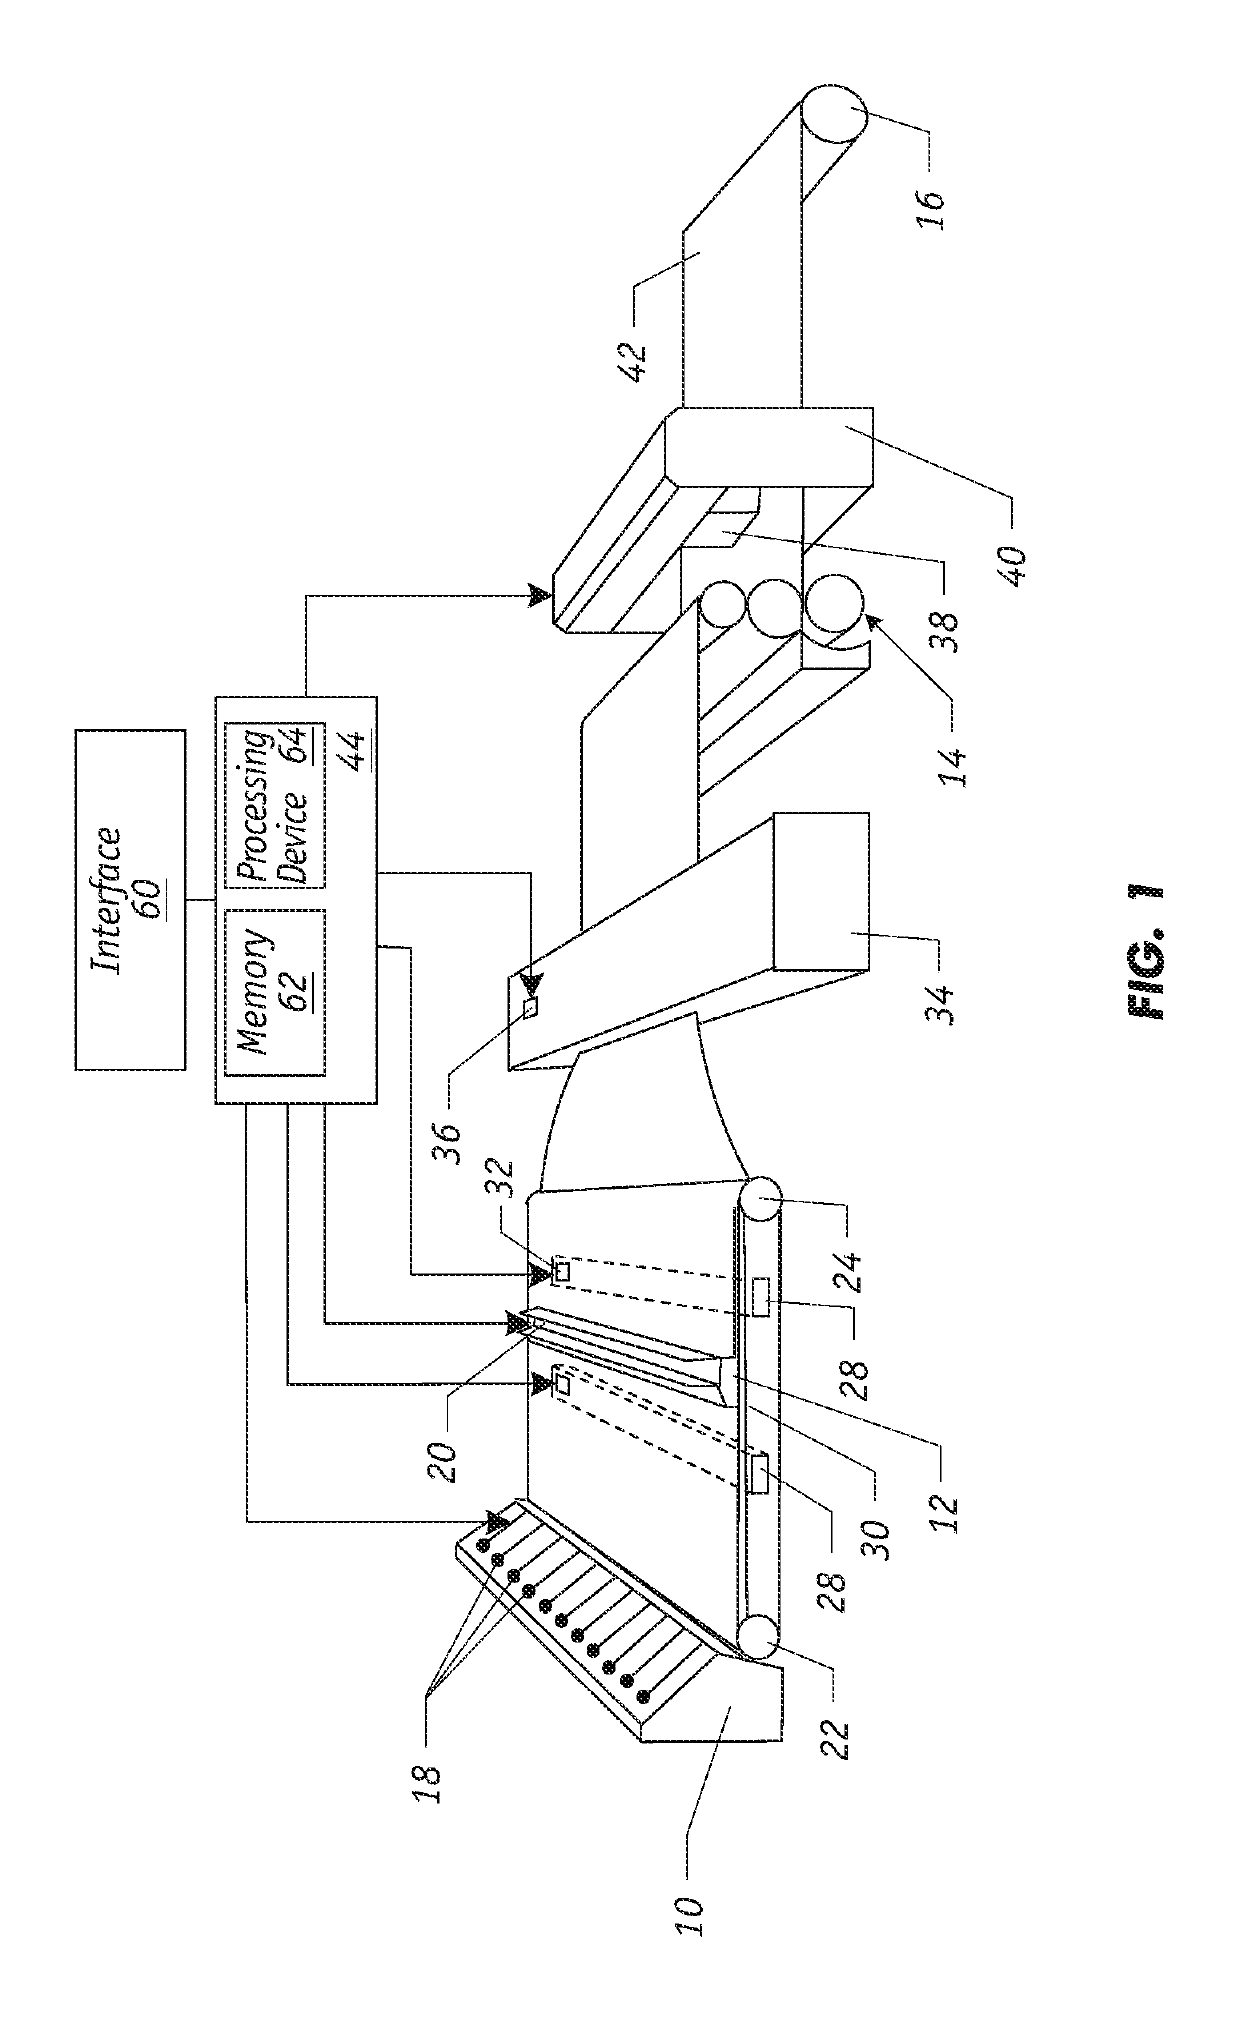 Method of designing model predictive control for cross directional flat sheet manufacturing processes to guarantee temporal robust stability and performance